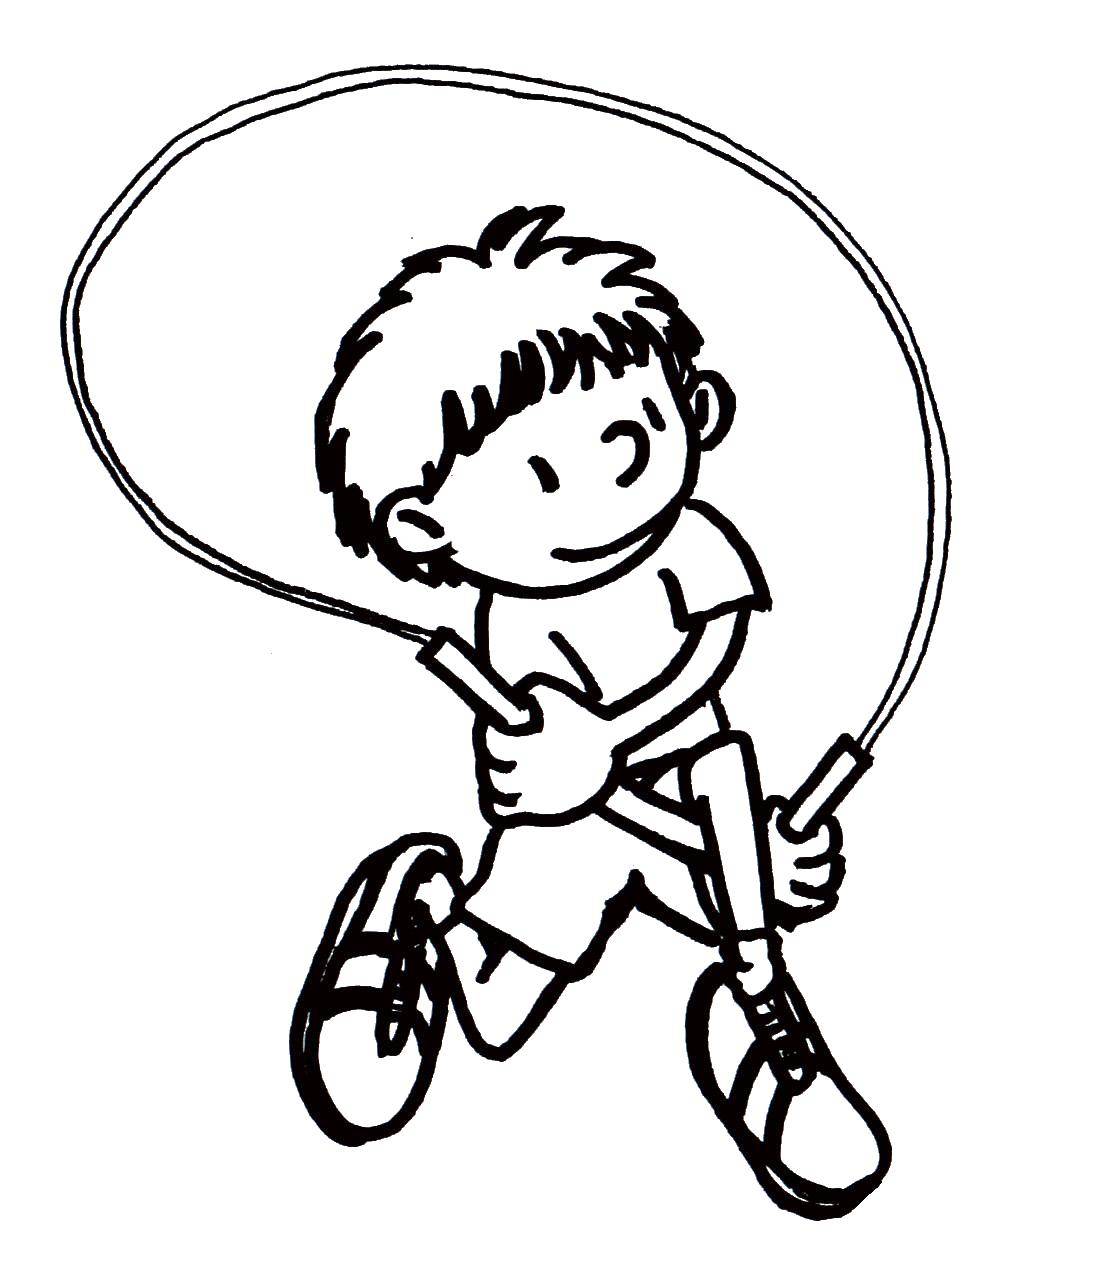 Coloring The boy with a rope.. Category The jump. Tags:  jump, jump rope, boy.